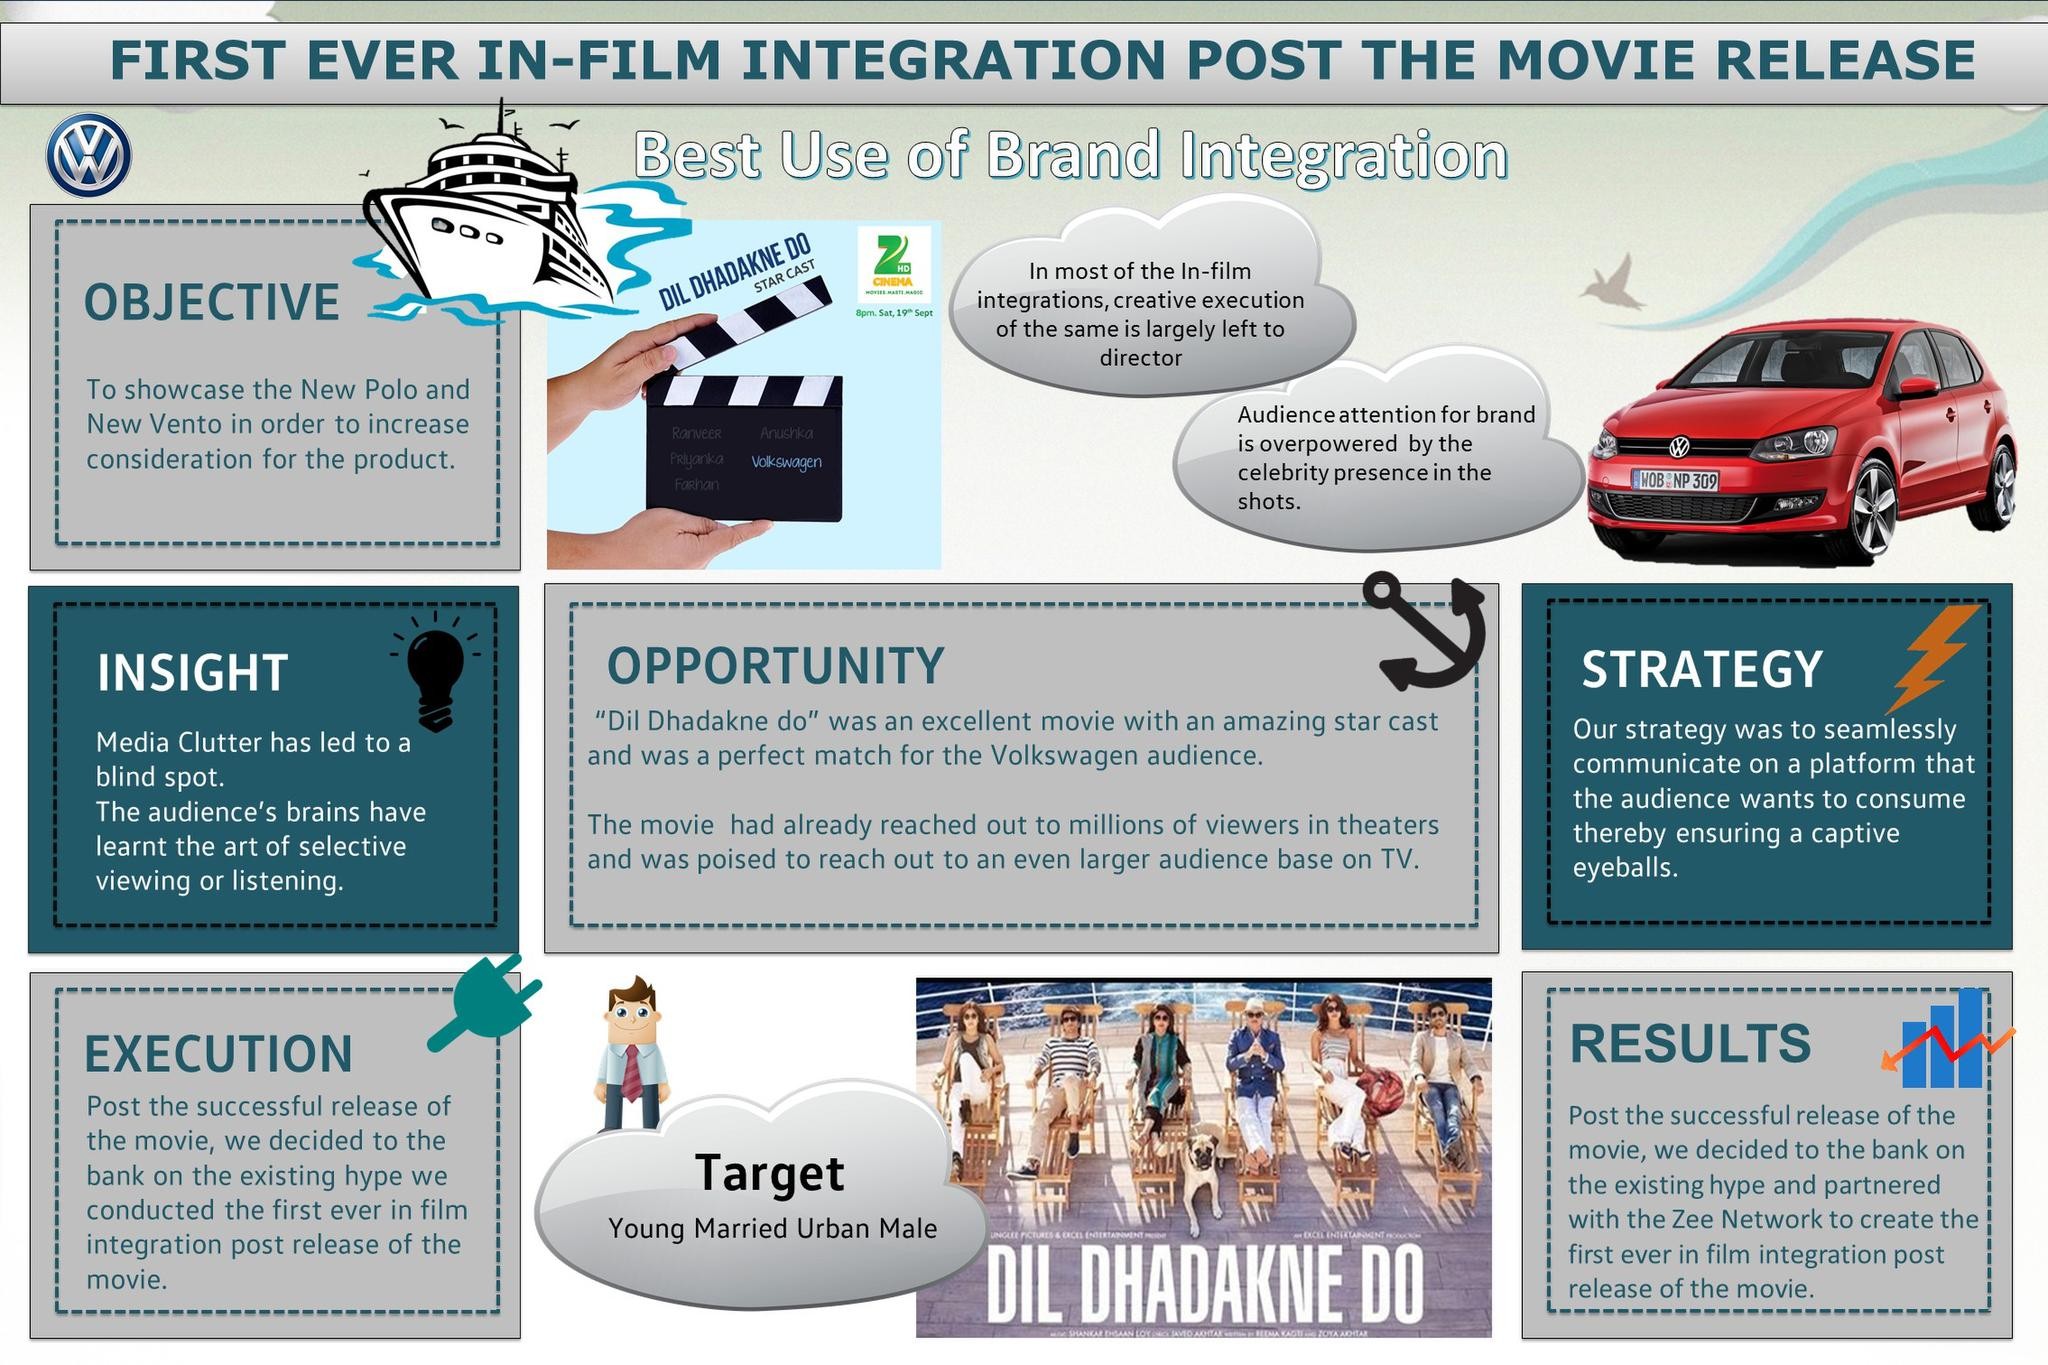 Volkswagen - First Ever In-Film Integration, POST the release of the movie